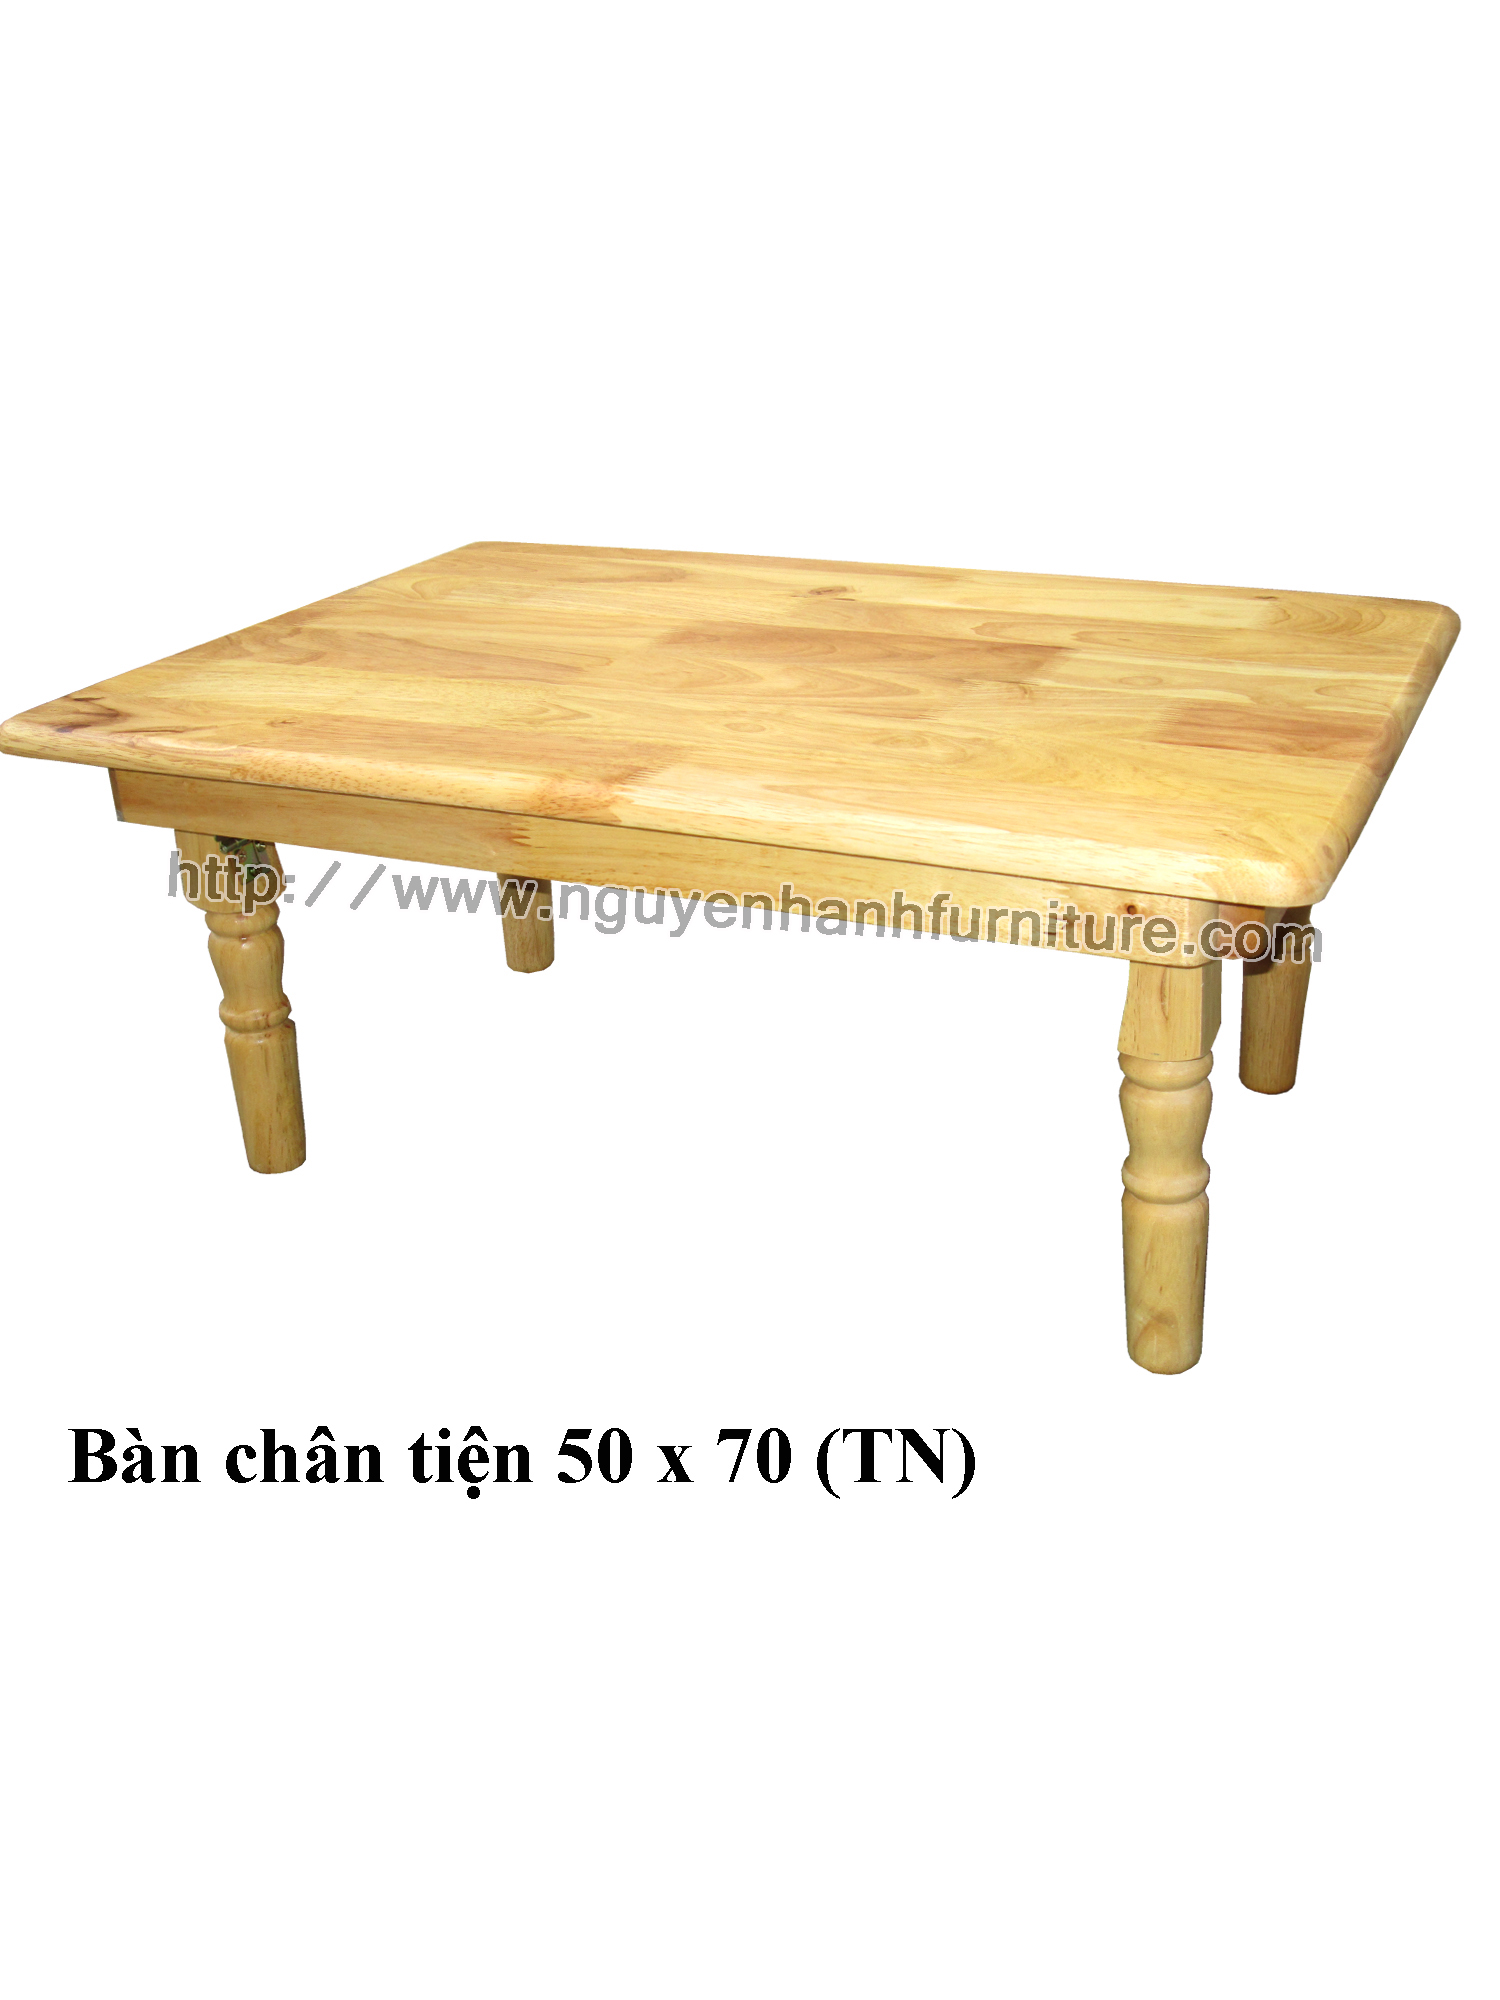 Name product: 5 x 7 Tea table with turnery legs (Natural) - Dimensions: 50 x 70 x 30 (H)  - Description: Wood natural rubber